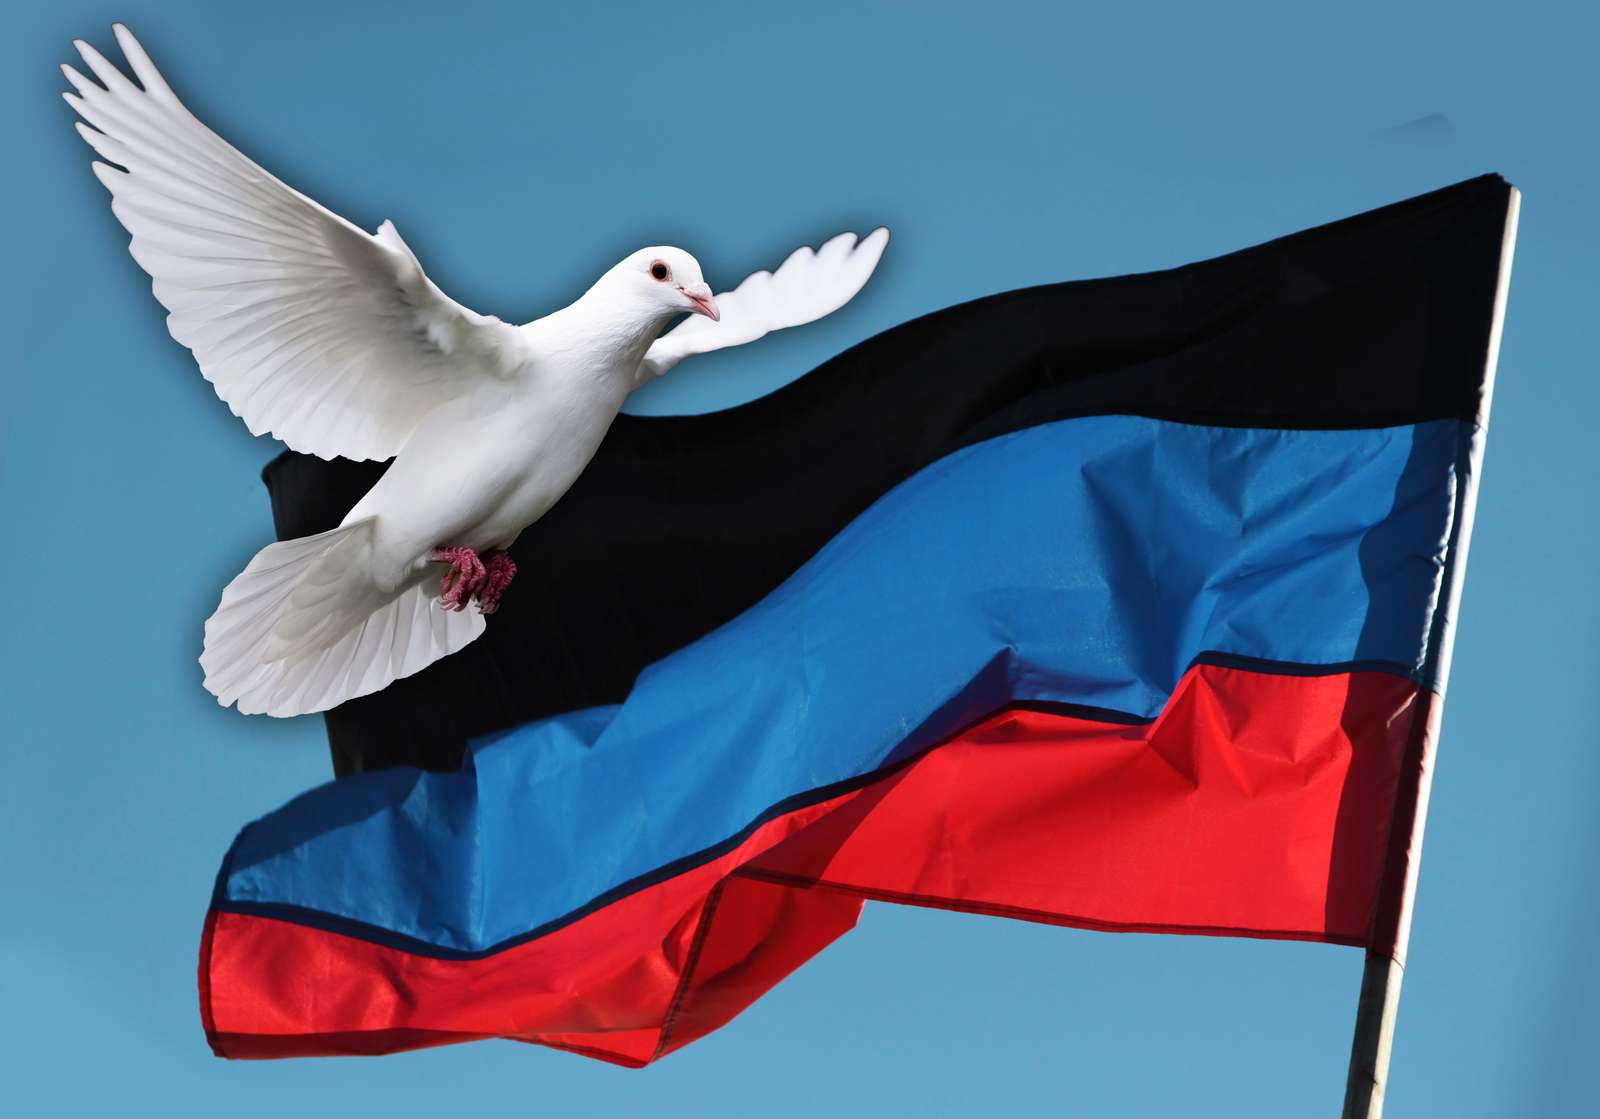 DPR flag puzzle online from photo